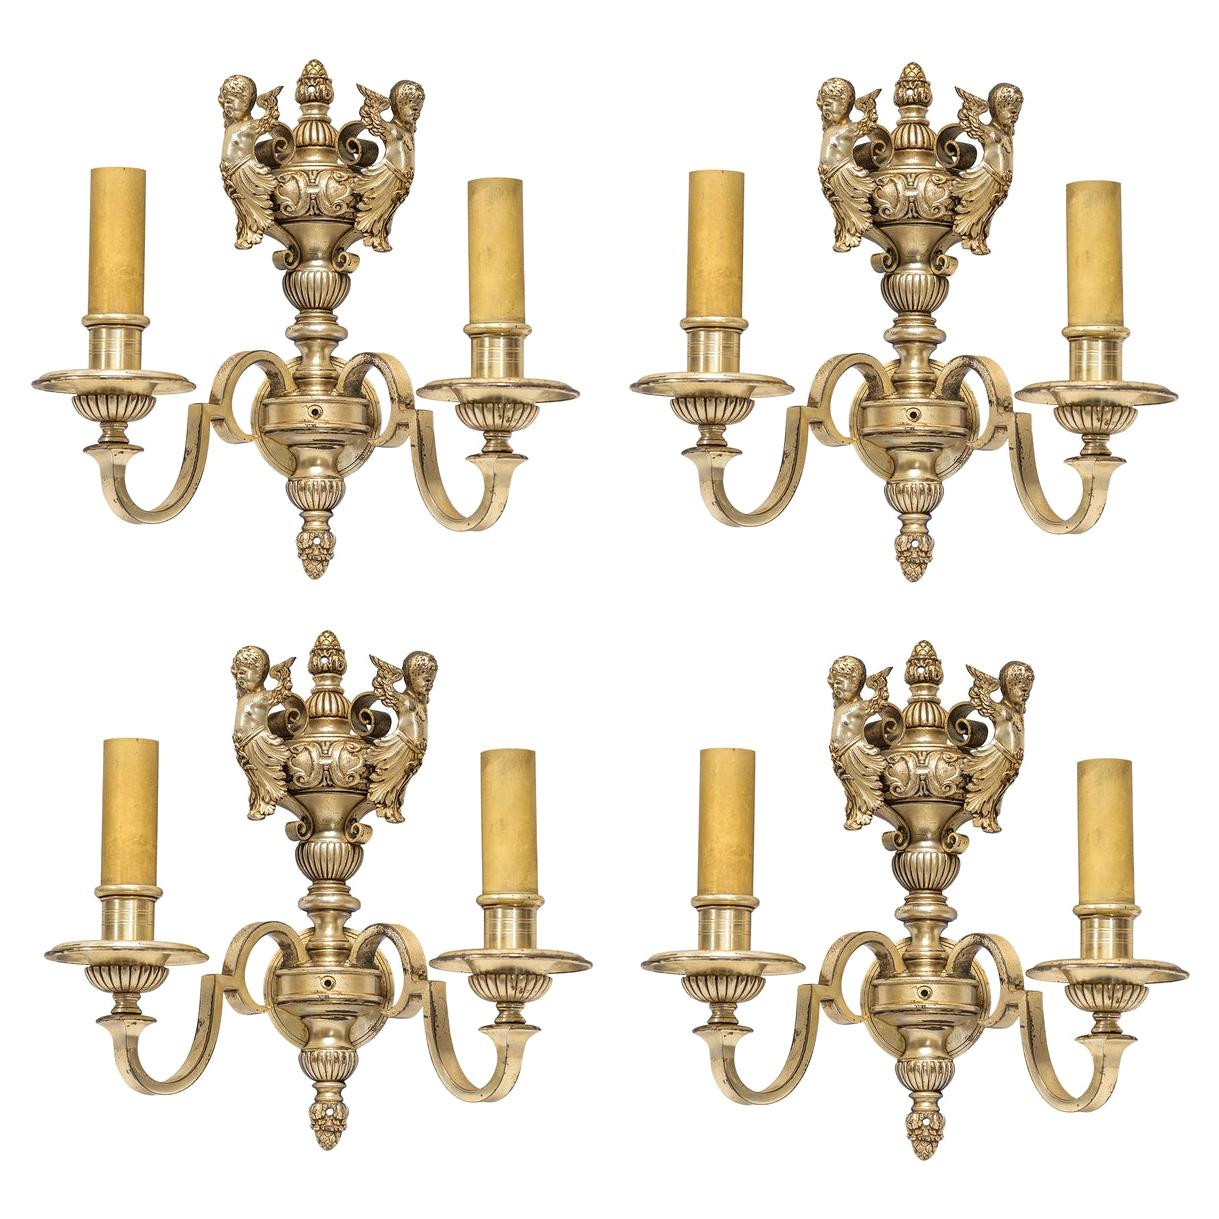 Four Fine Quality French Silvered Bronze Two-Light Sconces